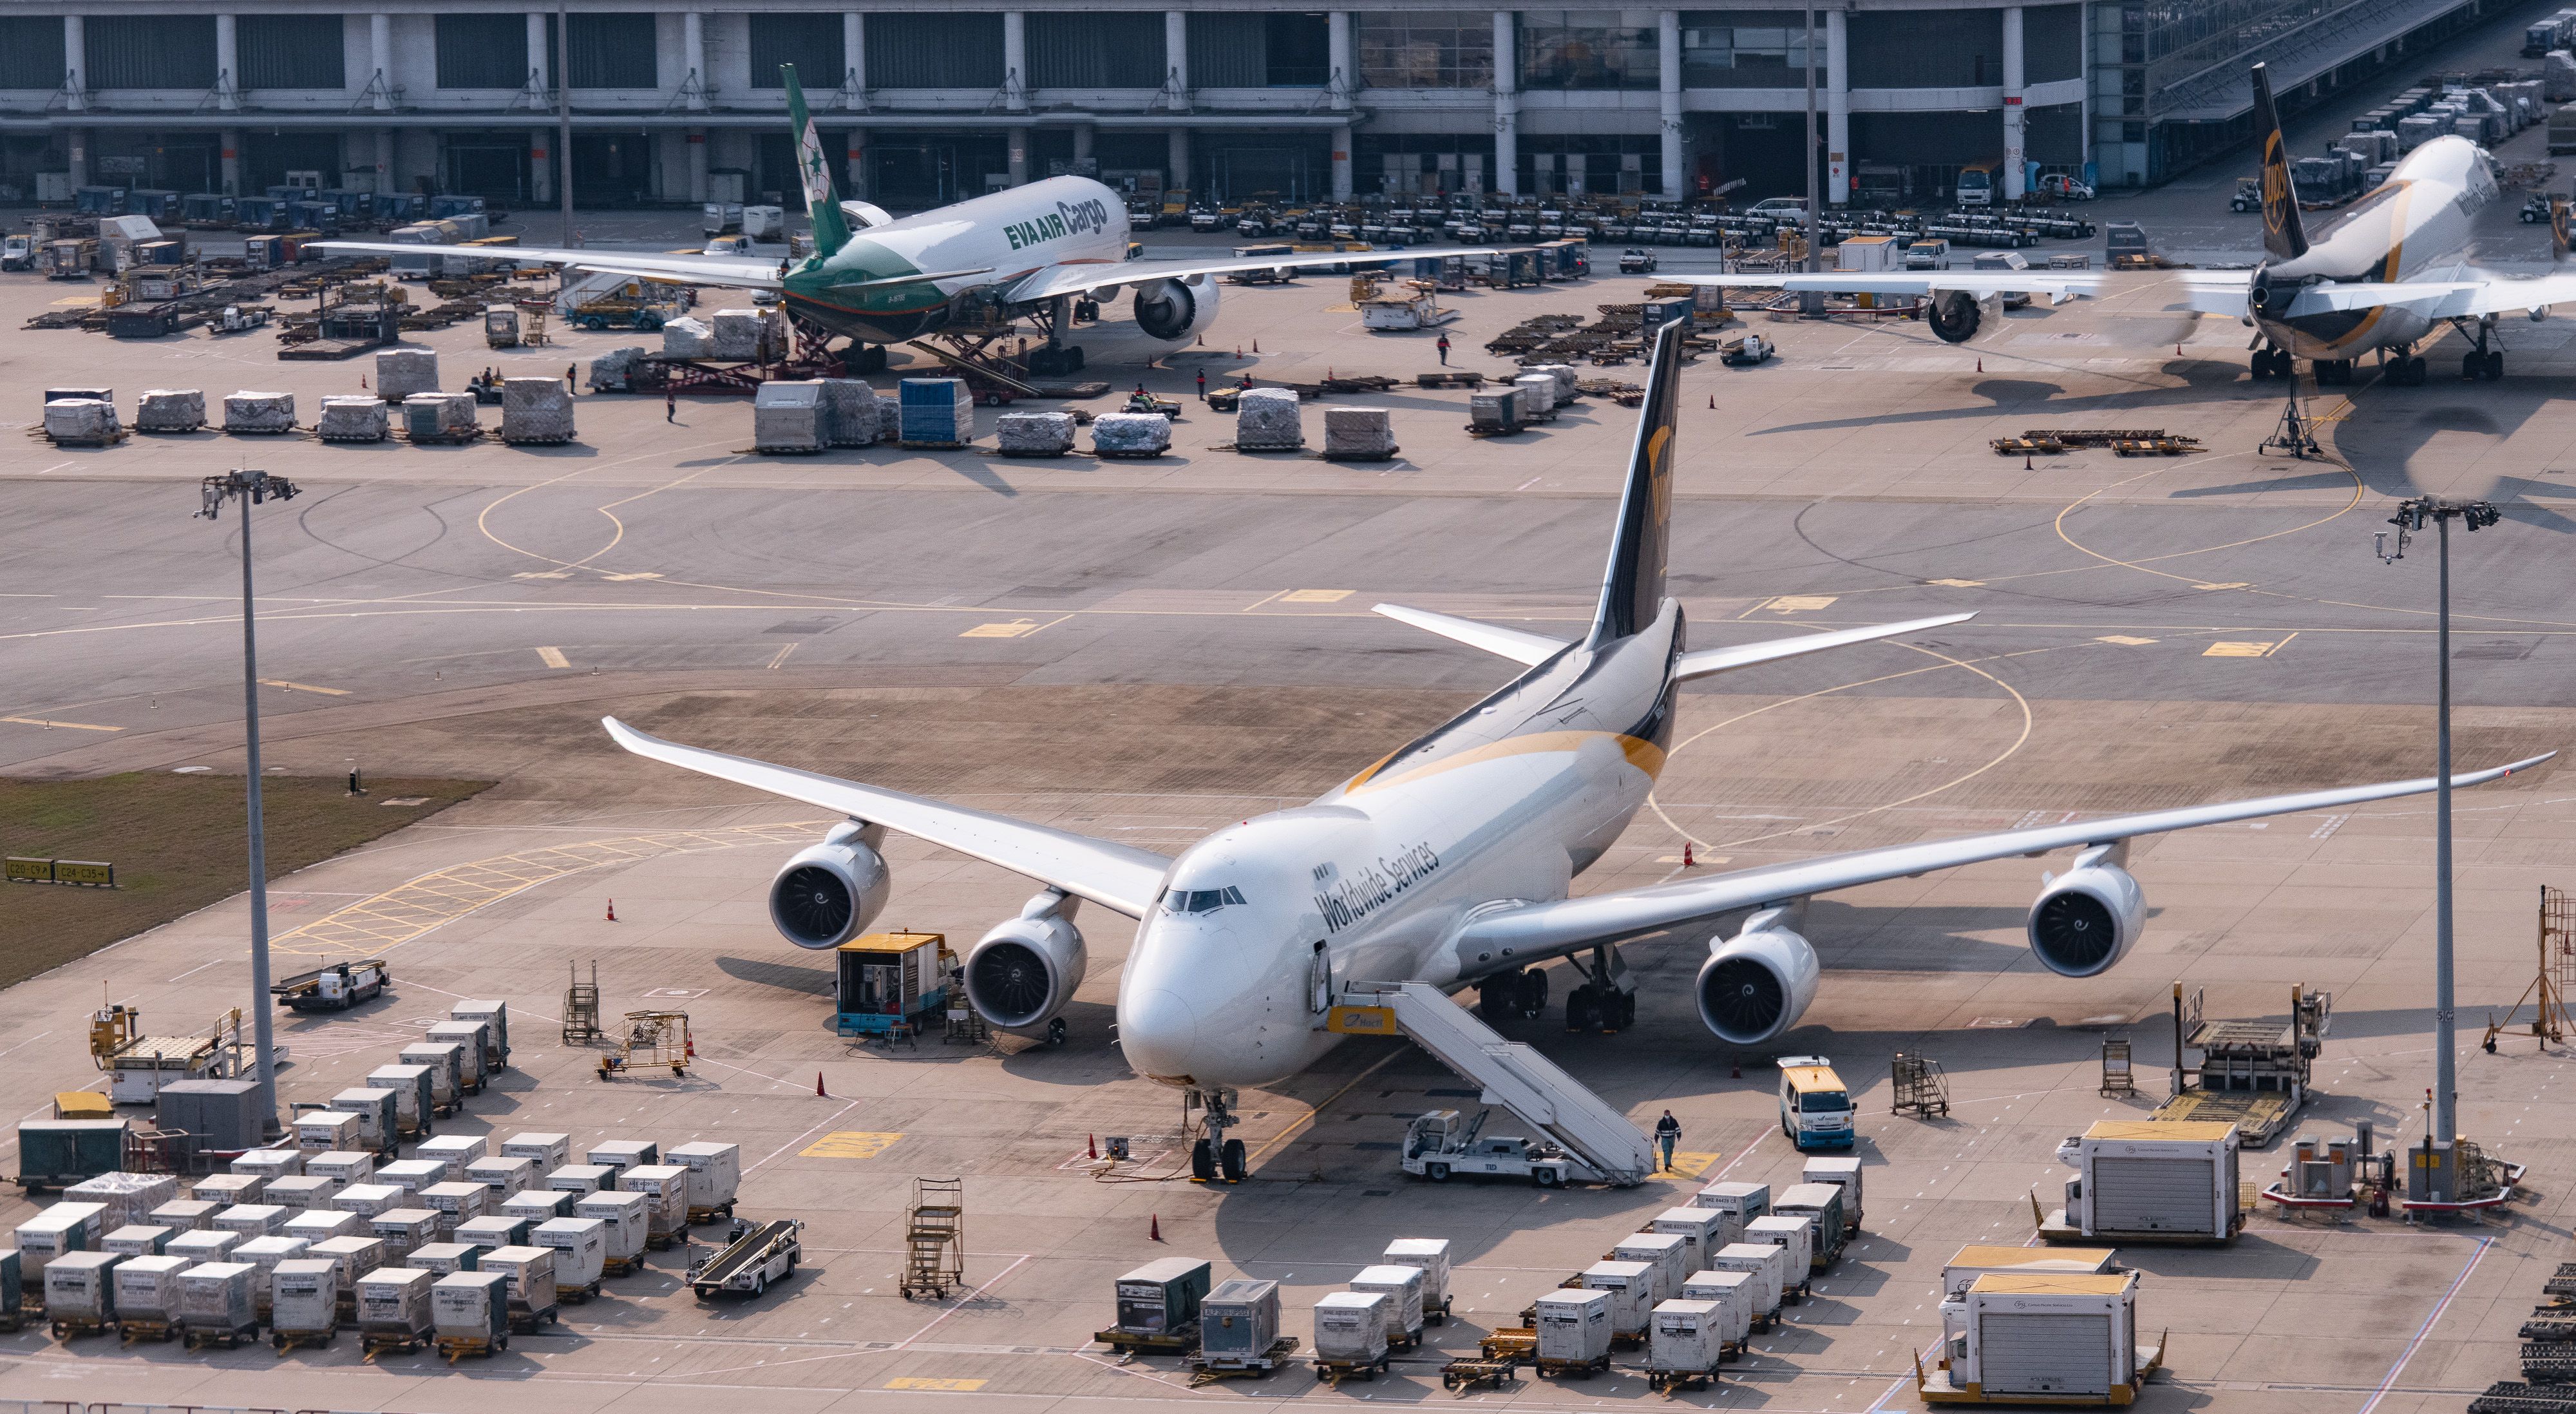 shutterstock_1724065009 - UPS Cargo Aircraft sit parked on the tarmac at Hong Kong International Airport amid travel restrictions as a result of the COVID-19 pandemic, on February 17, 2020, in Hong Kong, China. Photo by Victor